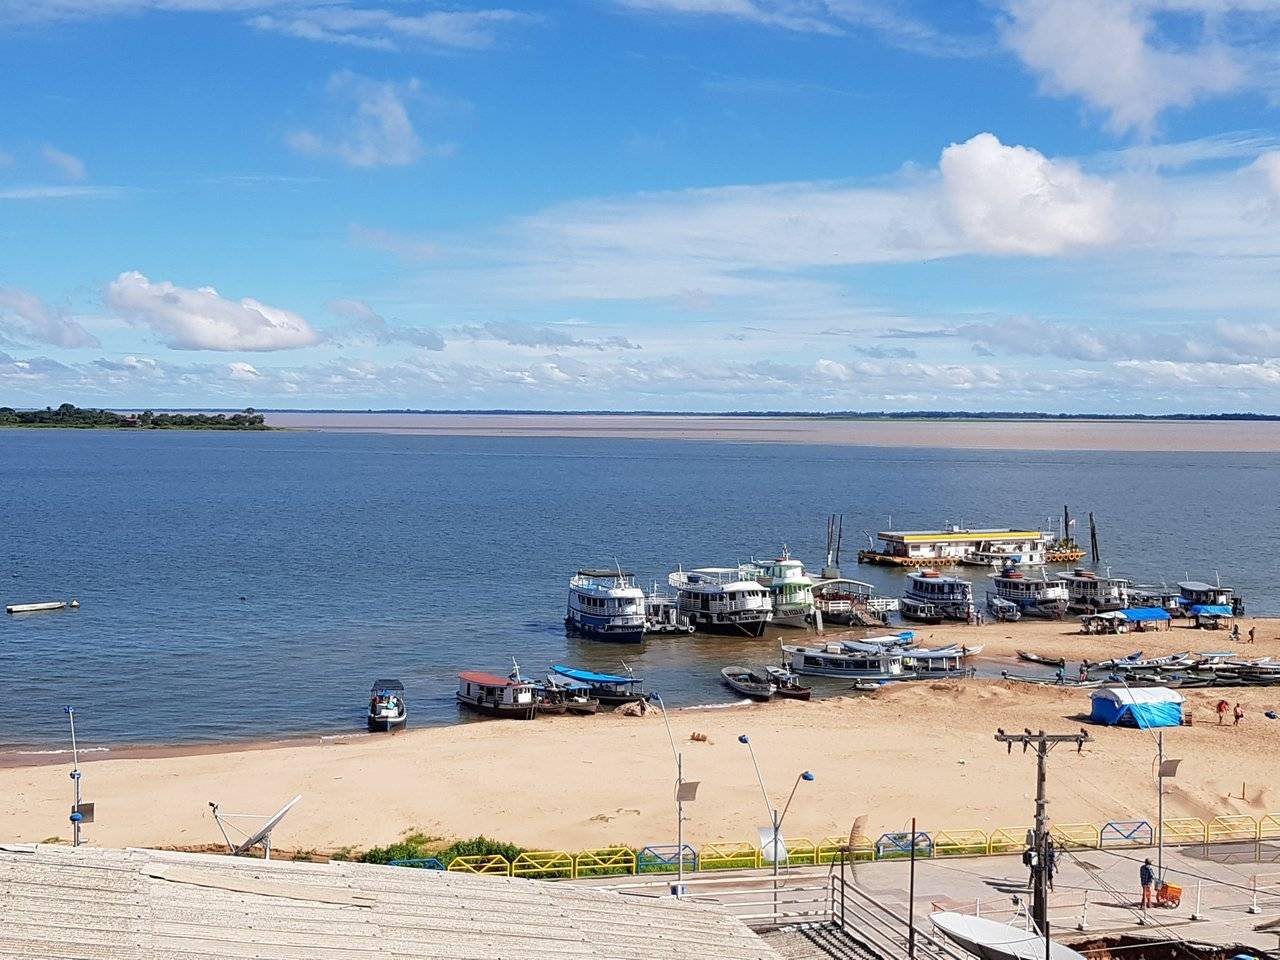 "Meeting of the waters": The blue Rio Tapajos ends into the brownish Amazon River